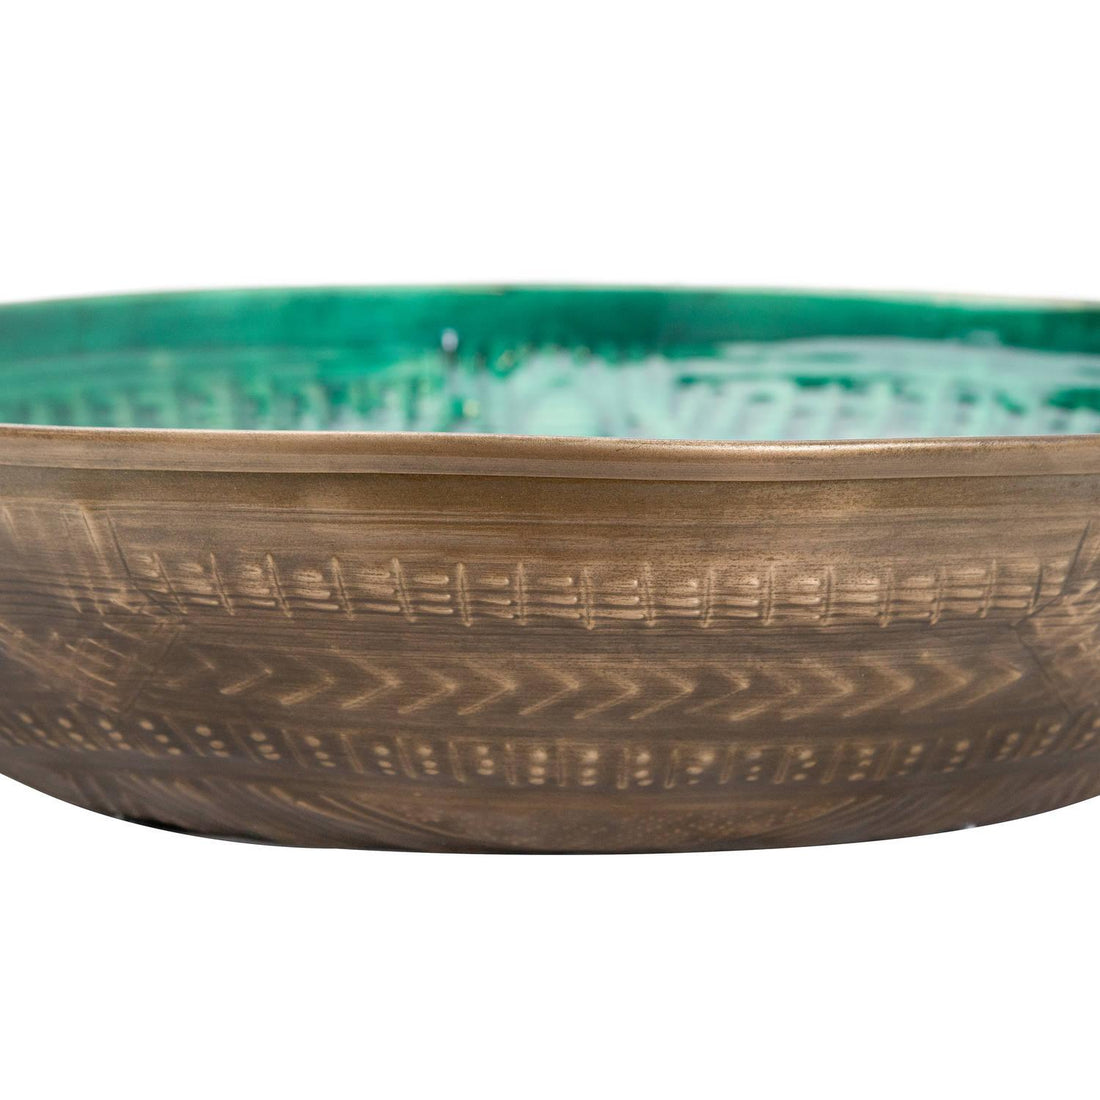 Aztec Collection Brass Embossed Ceramic Large Bowl - £119.95 - Gifts & Accessories > Kitchen And Tableware 